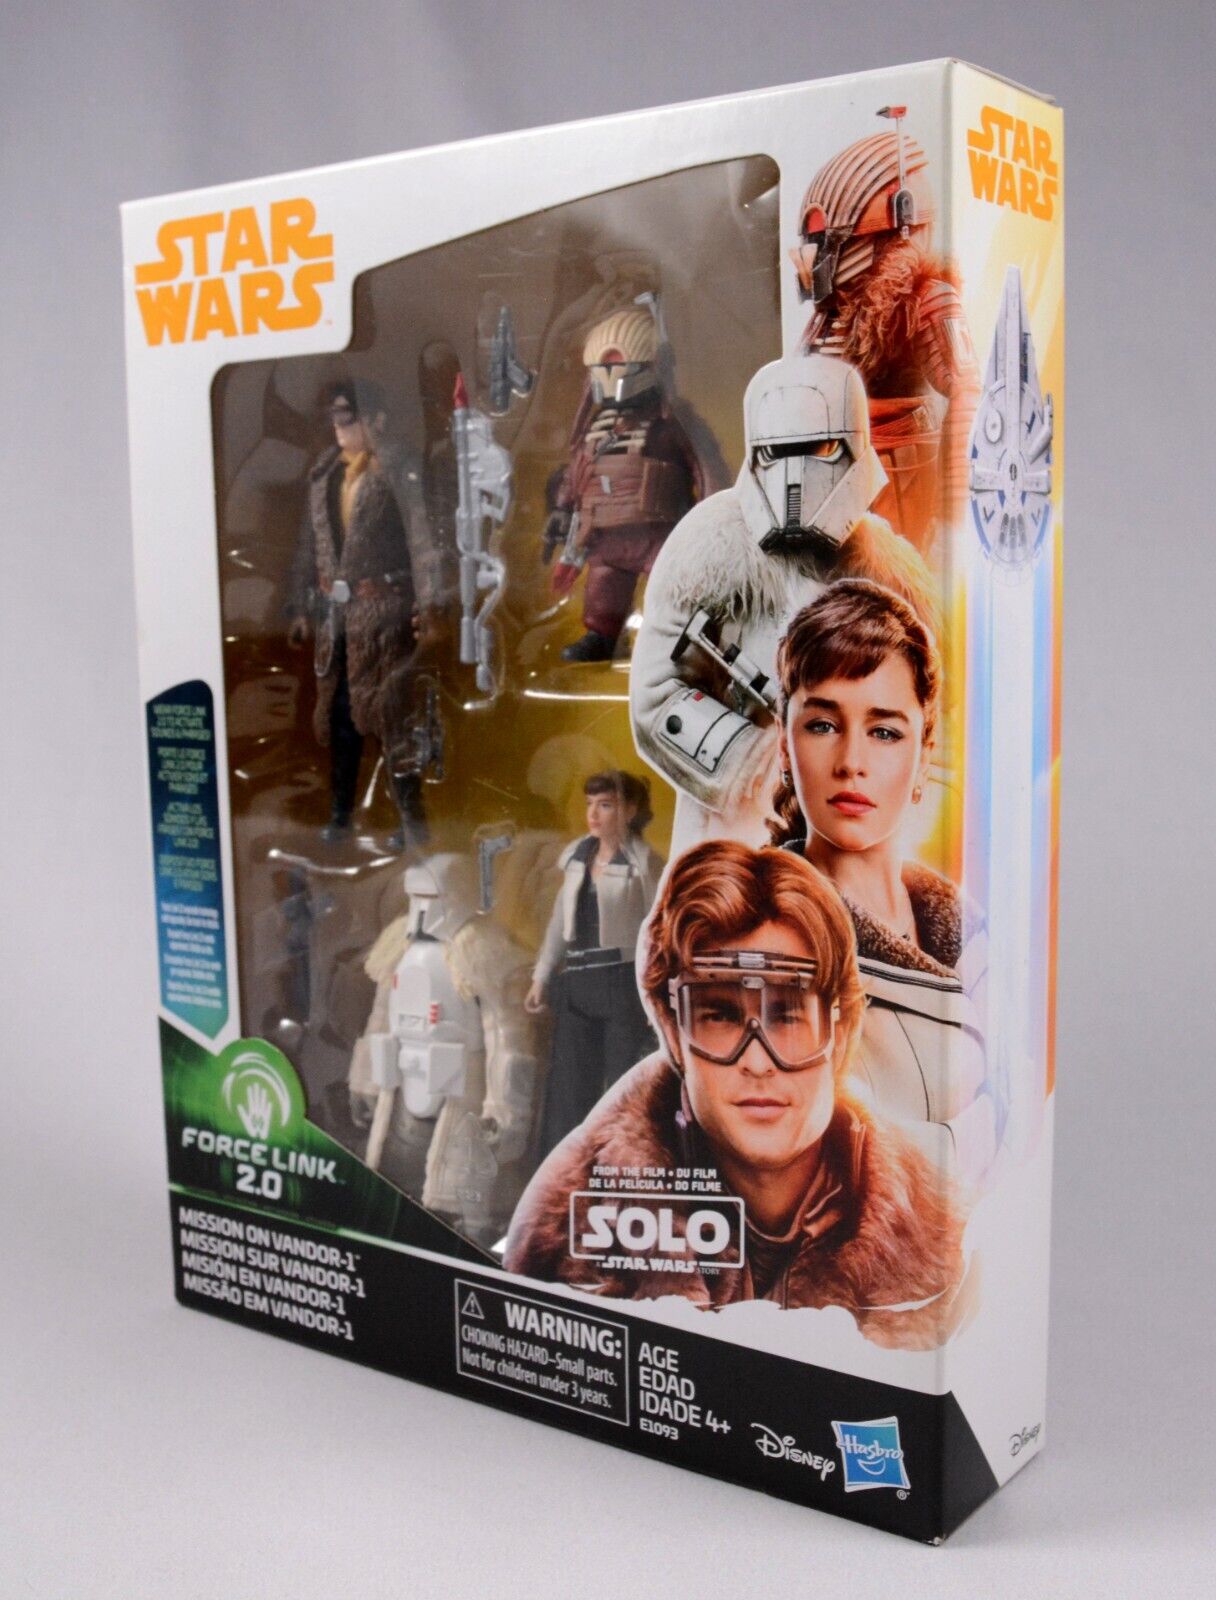 Star Wars MISSION ON VANDOR-1 FIGURE 4-PACK NEW SEALED Force Link 2.0 Han Solo Hasbro Does not apply